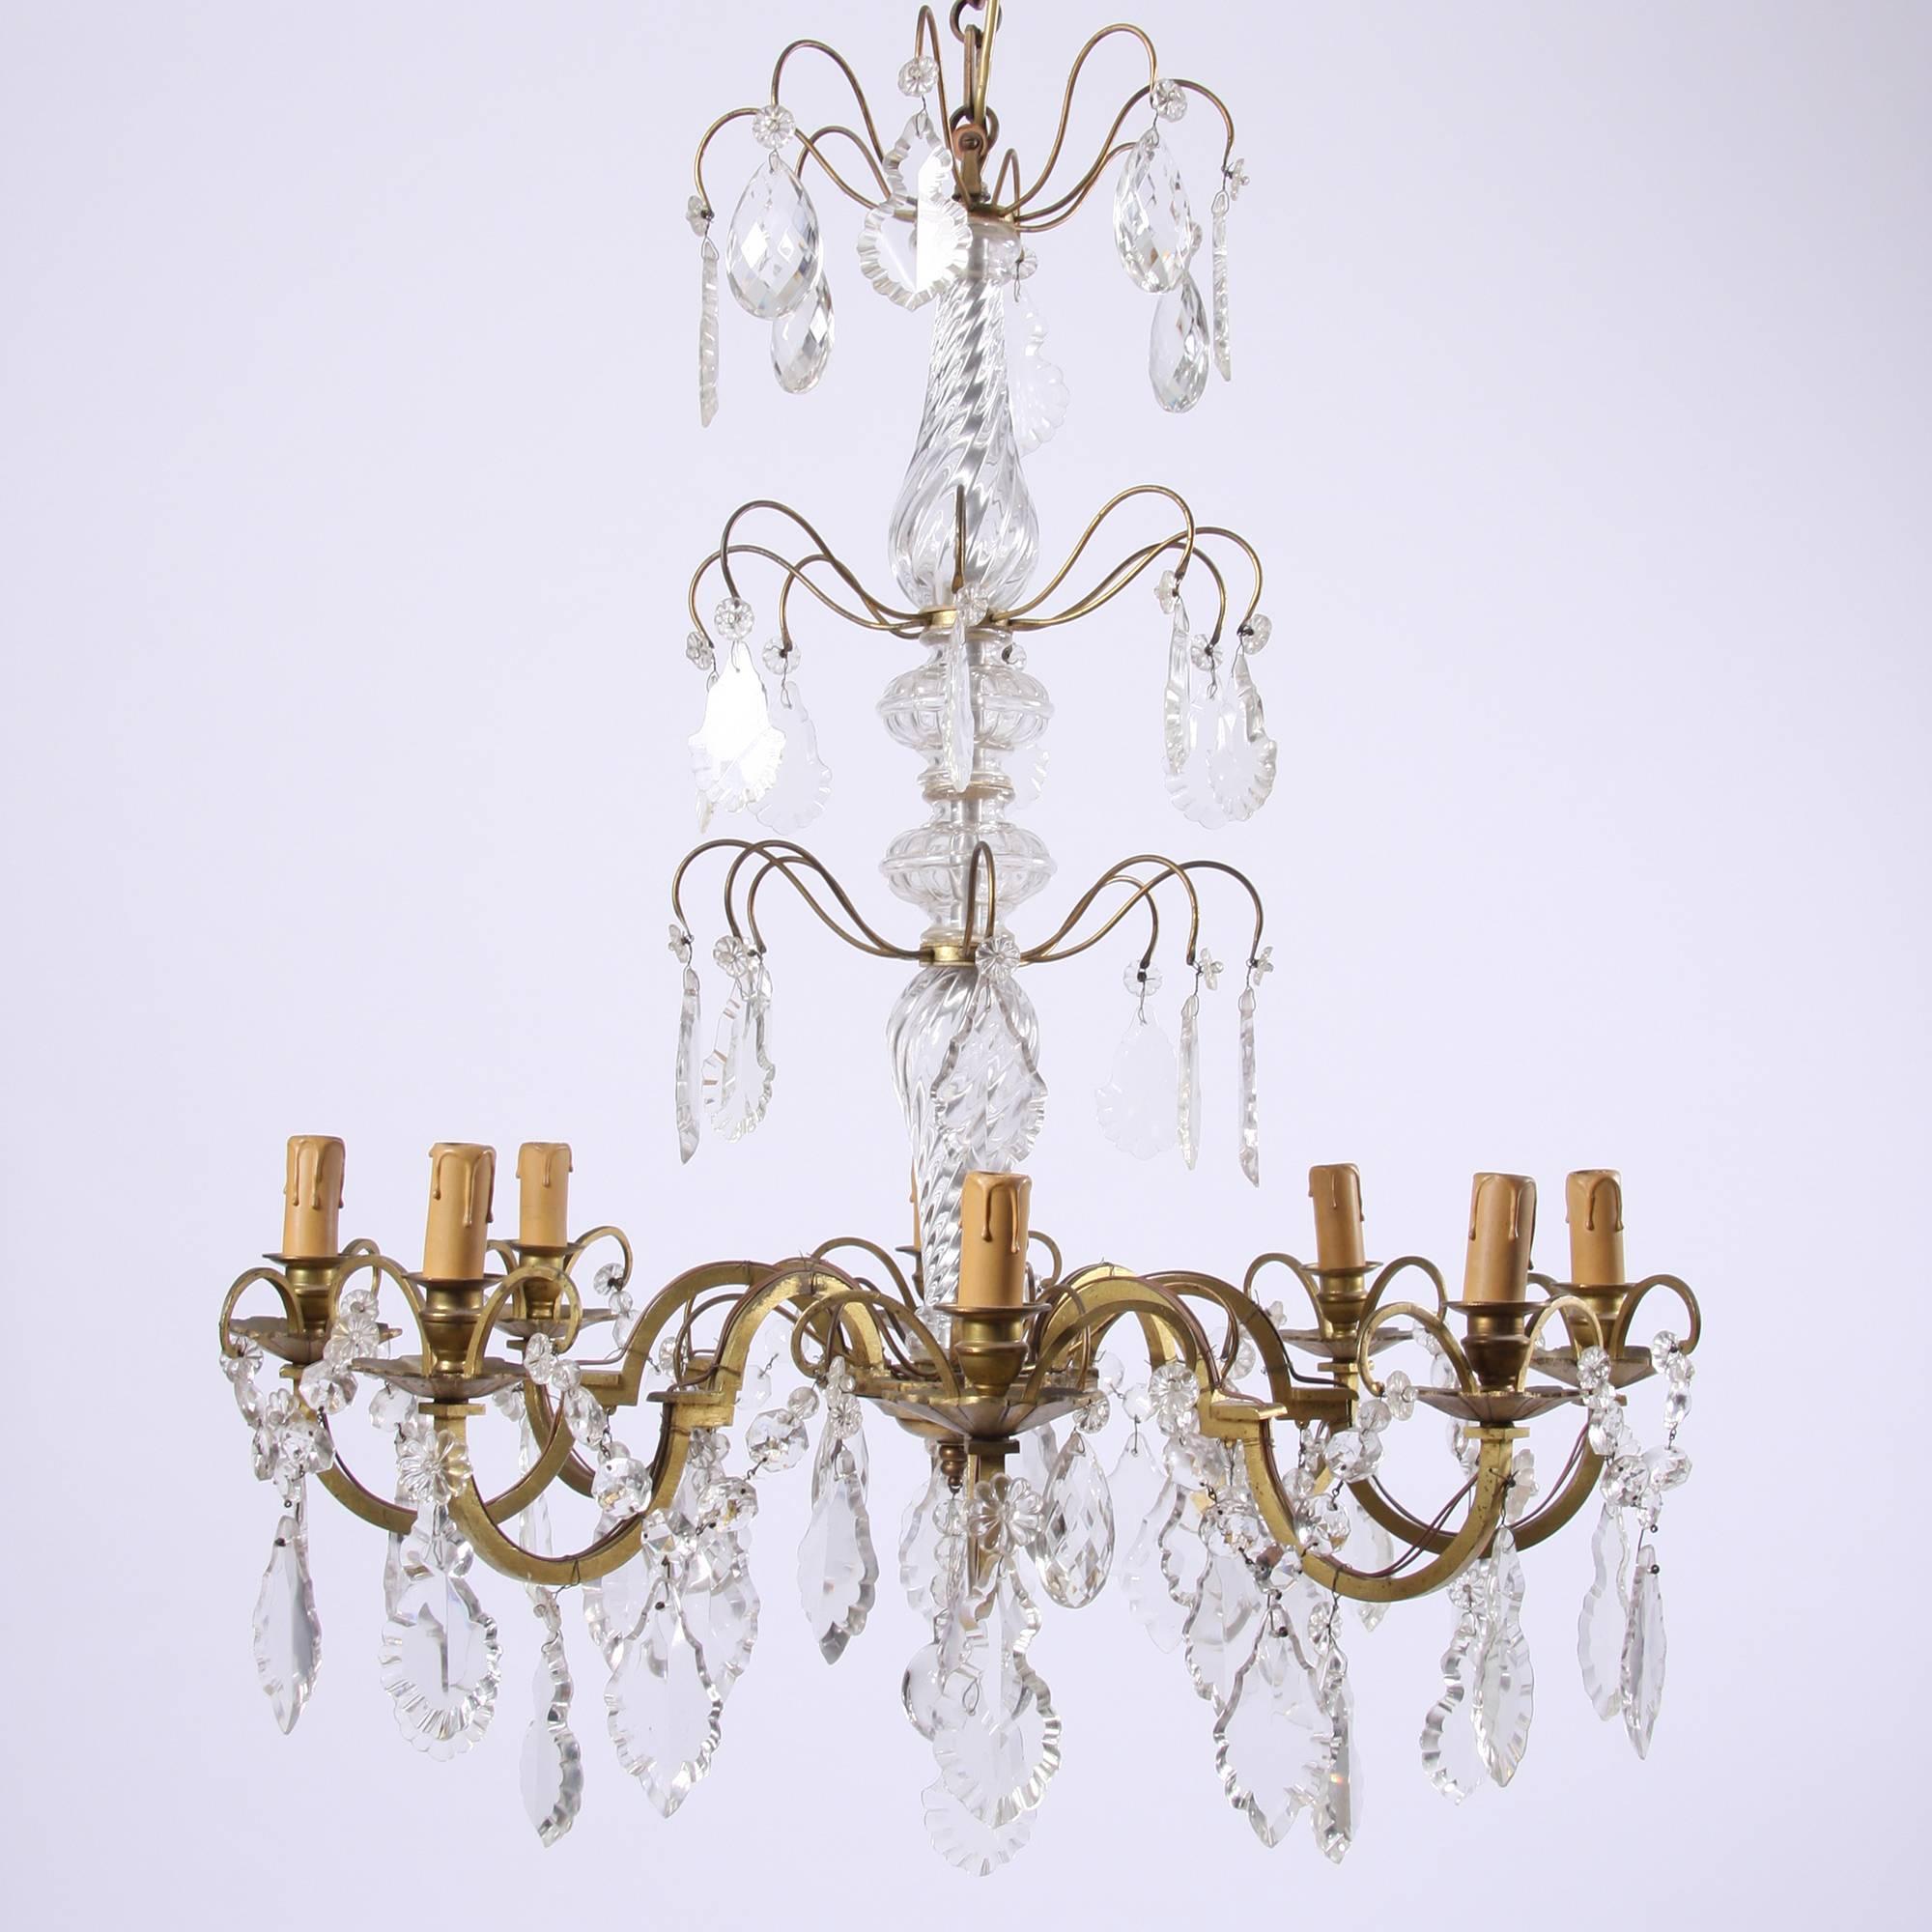 French, early 20th century

Eight-branch crystal chandelier. Rewired and PAT tested.